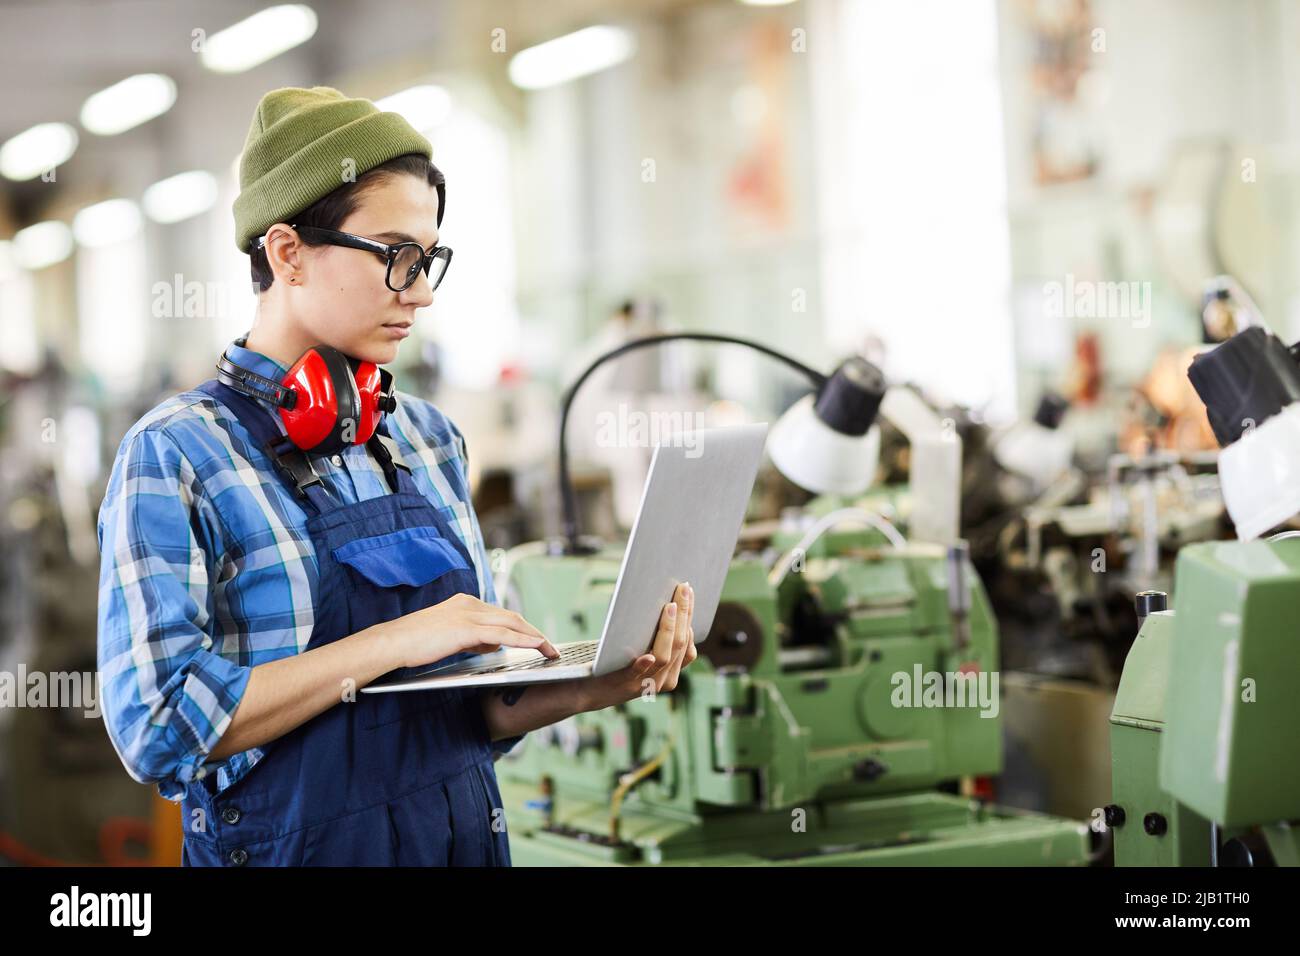 Serious lady engineer in overall standing in factory shop and examining online sketch on laptop Stock Photo